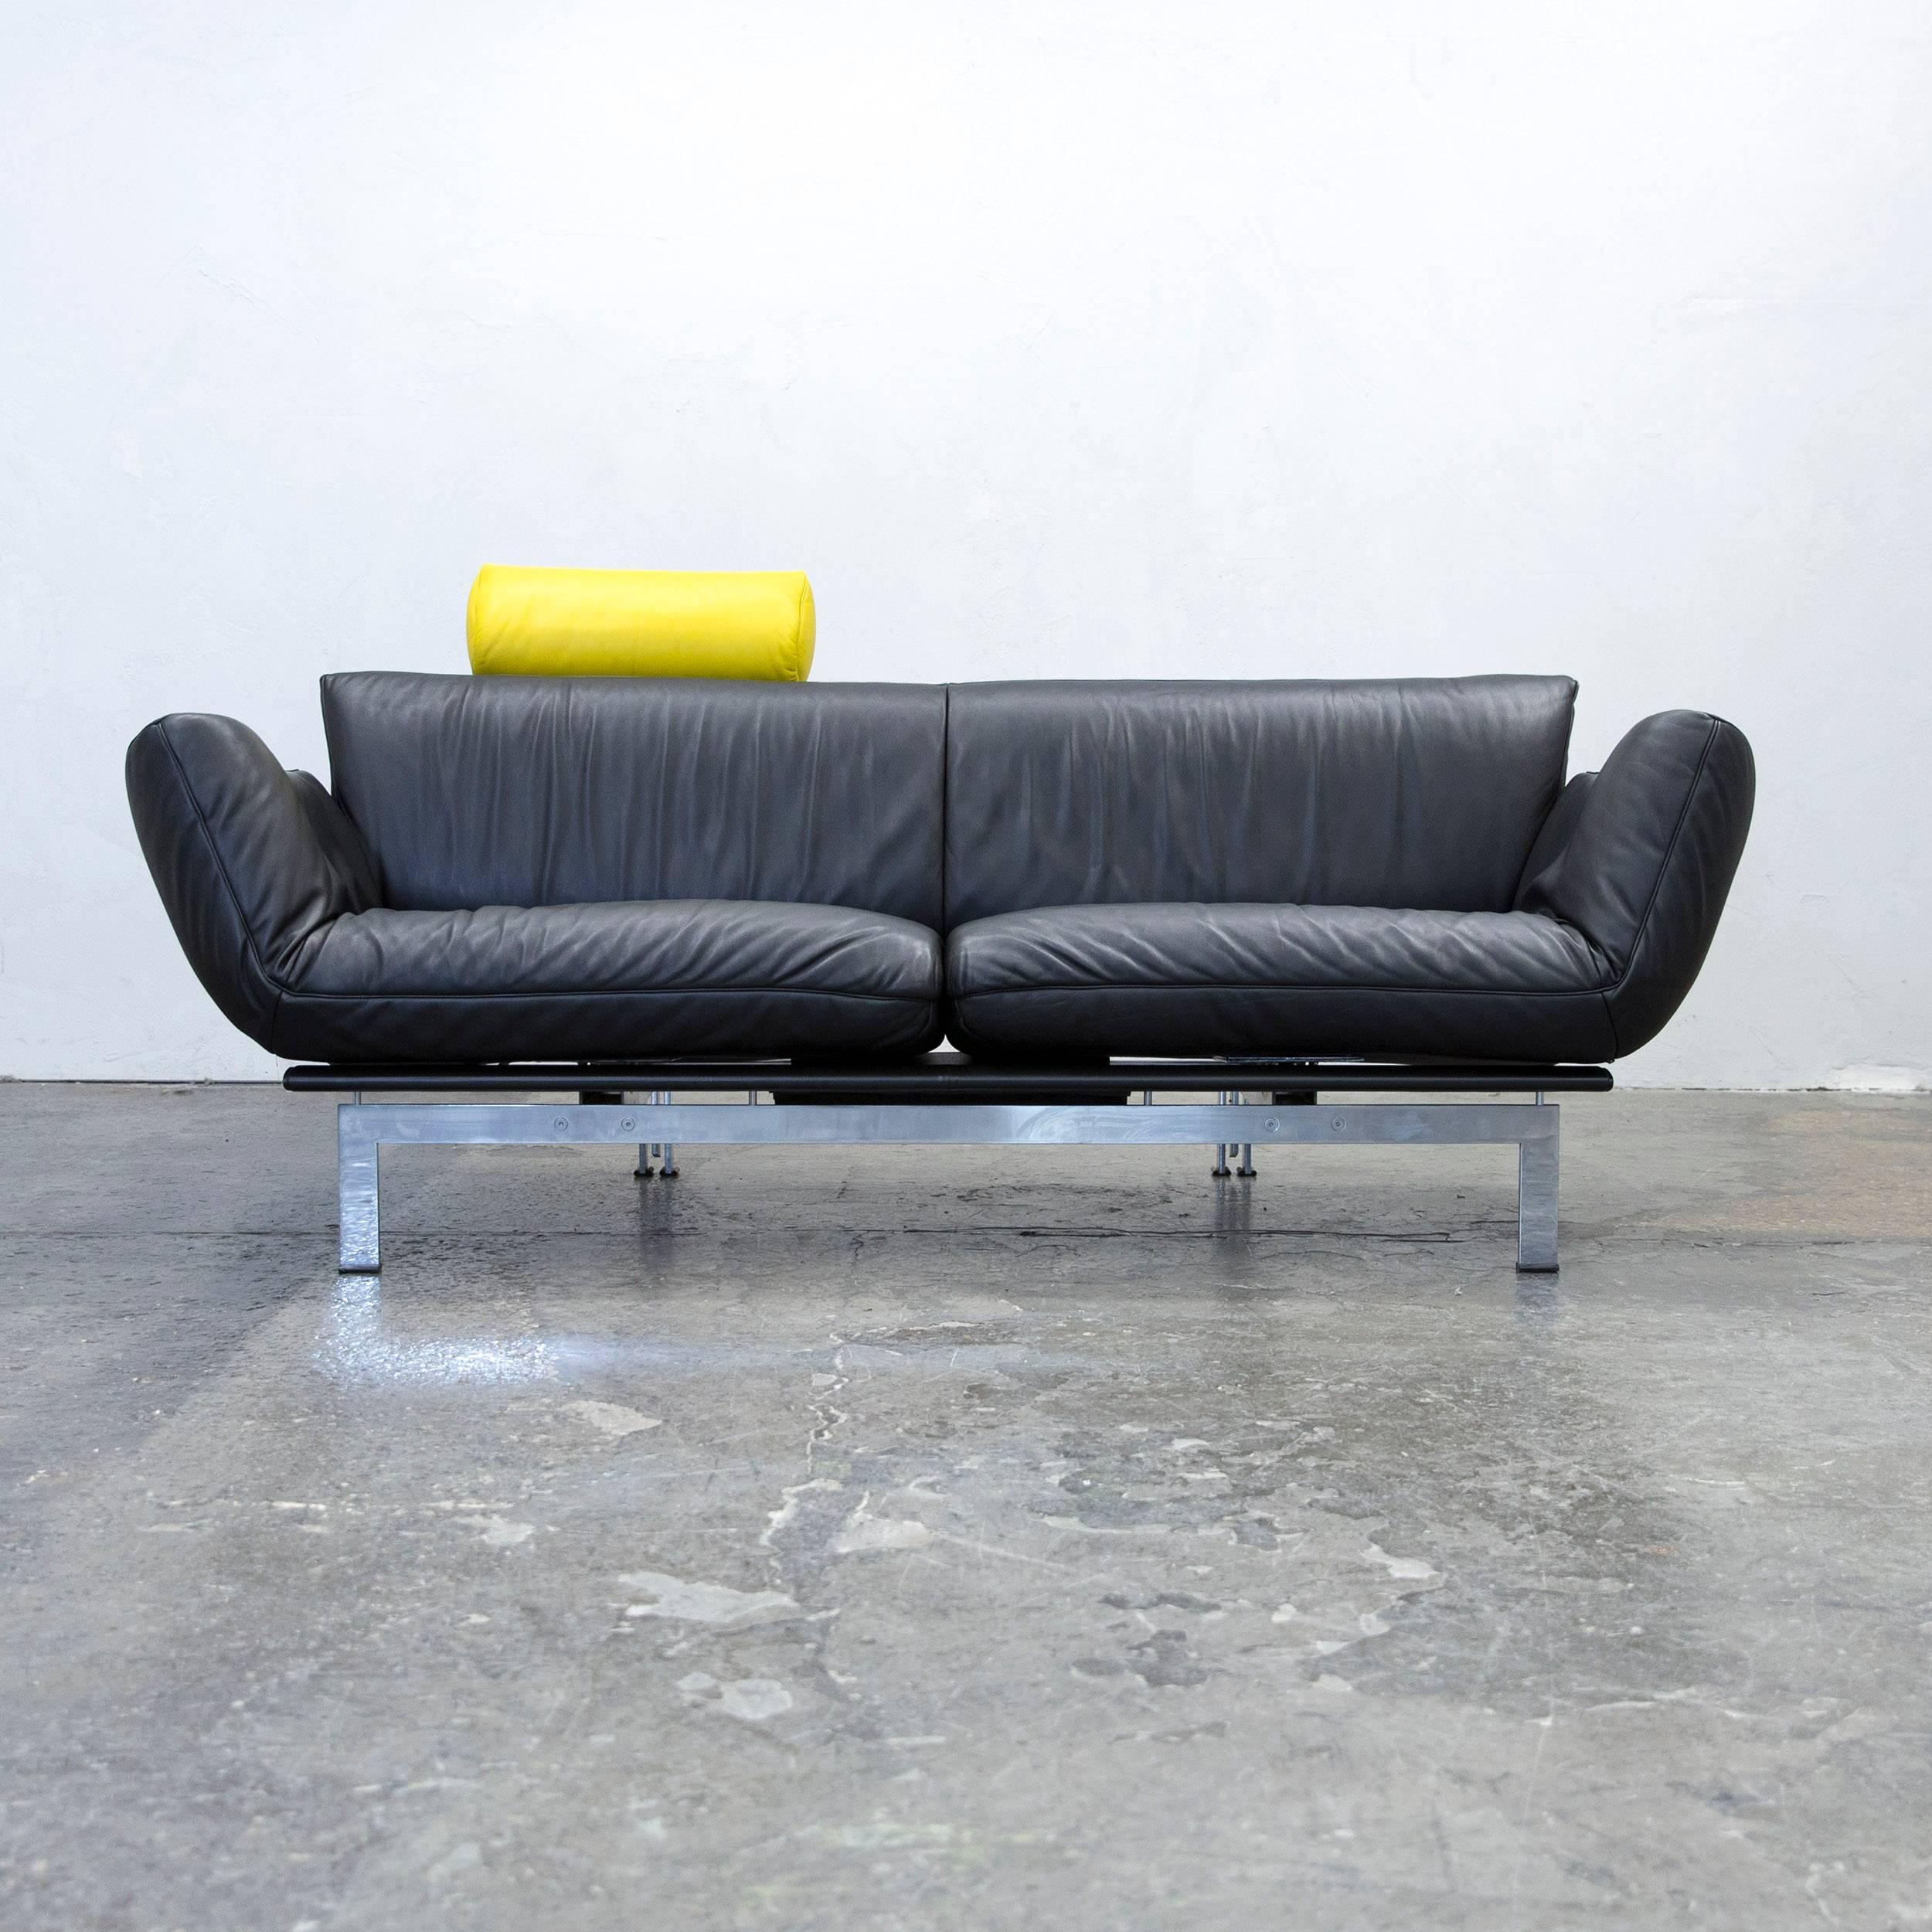 Contemporary De Sede Ds 140 Designer Sofa Leather Black Yellow Two-Seat Relax Function Couch